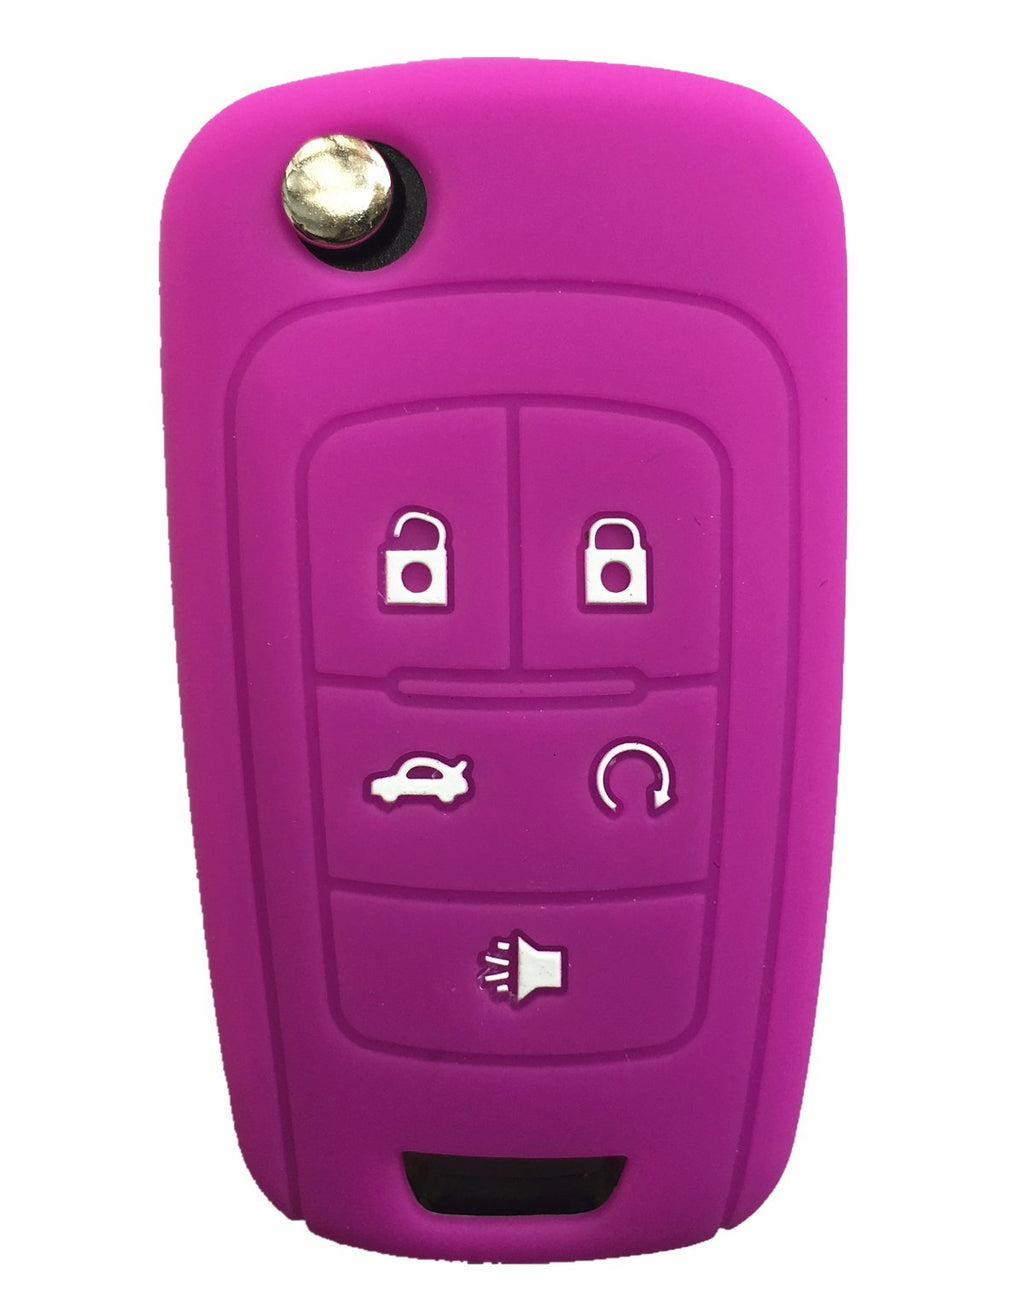  [AUSTRALIA] - Rpkey Silicone Keyless Entry Remote Control Key Fob Cover Case protector For Buick Encore LaCrosse Regal Verano（Violet）OHT01060512 5461A-01060512